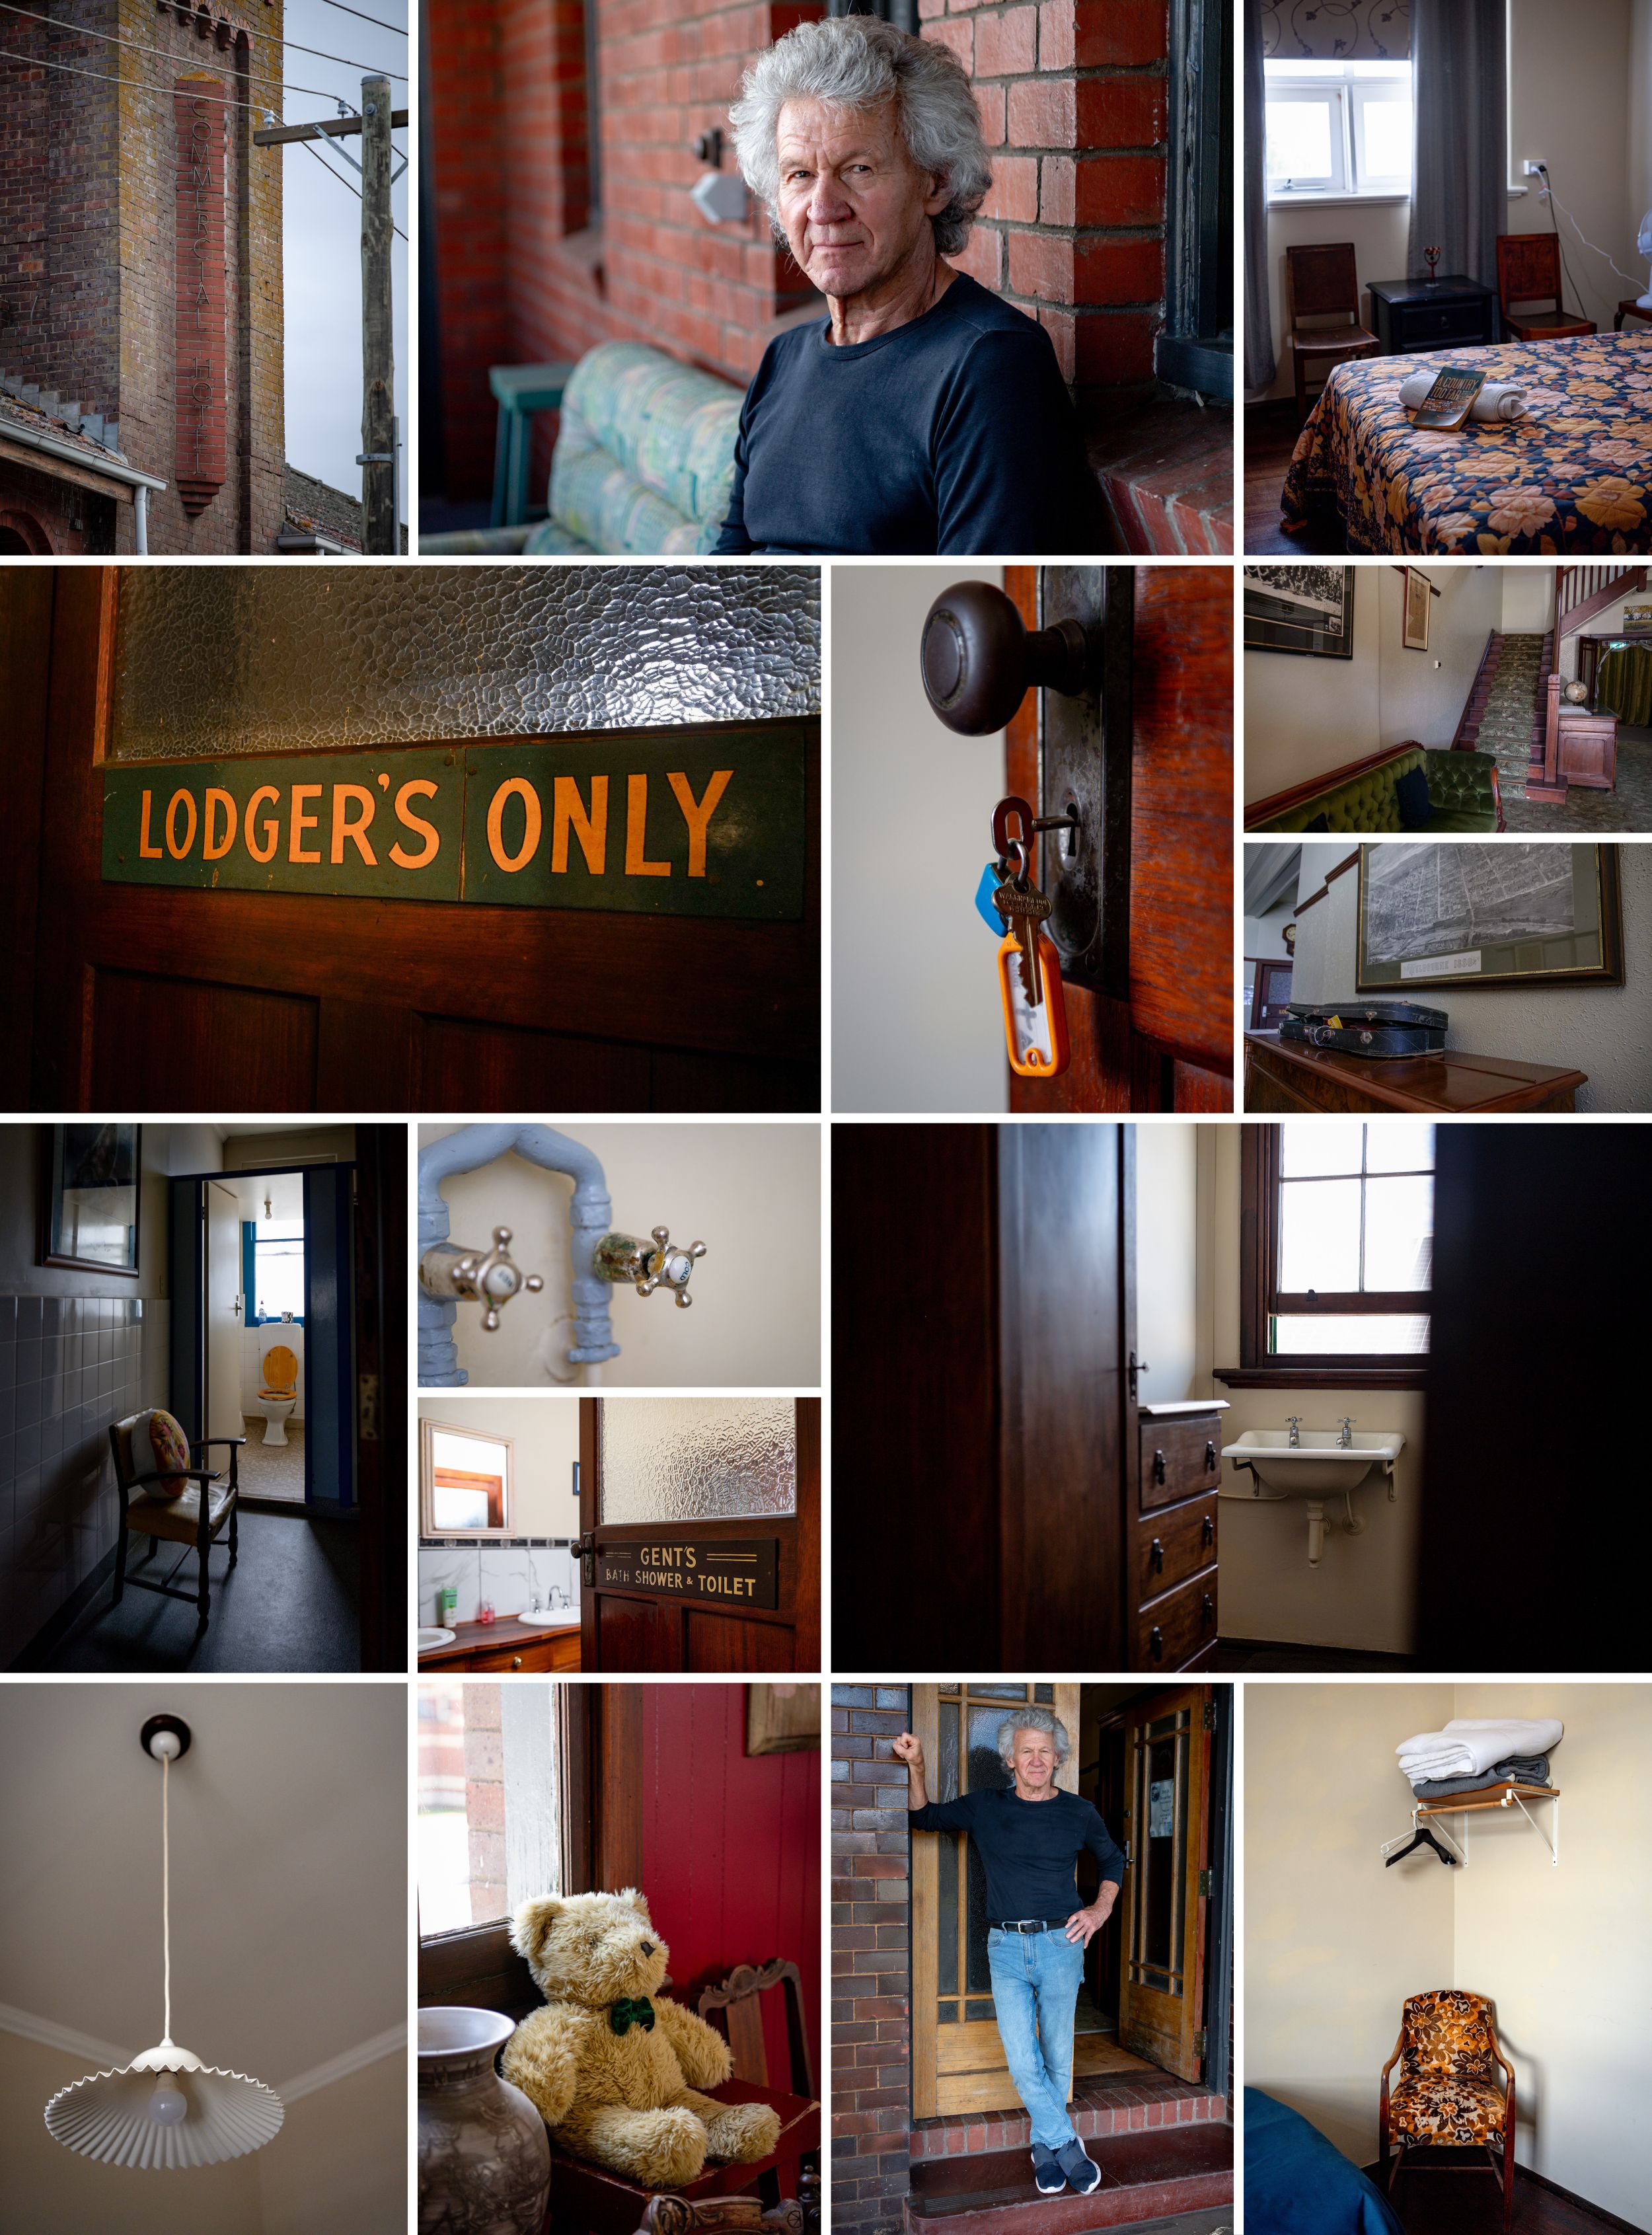 A composite picture of numerous images from inside the Commercial Hotel in Terang